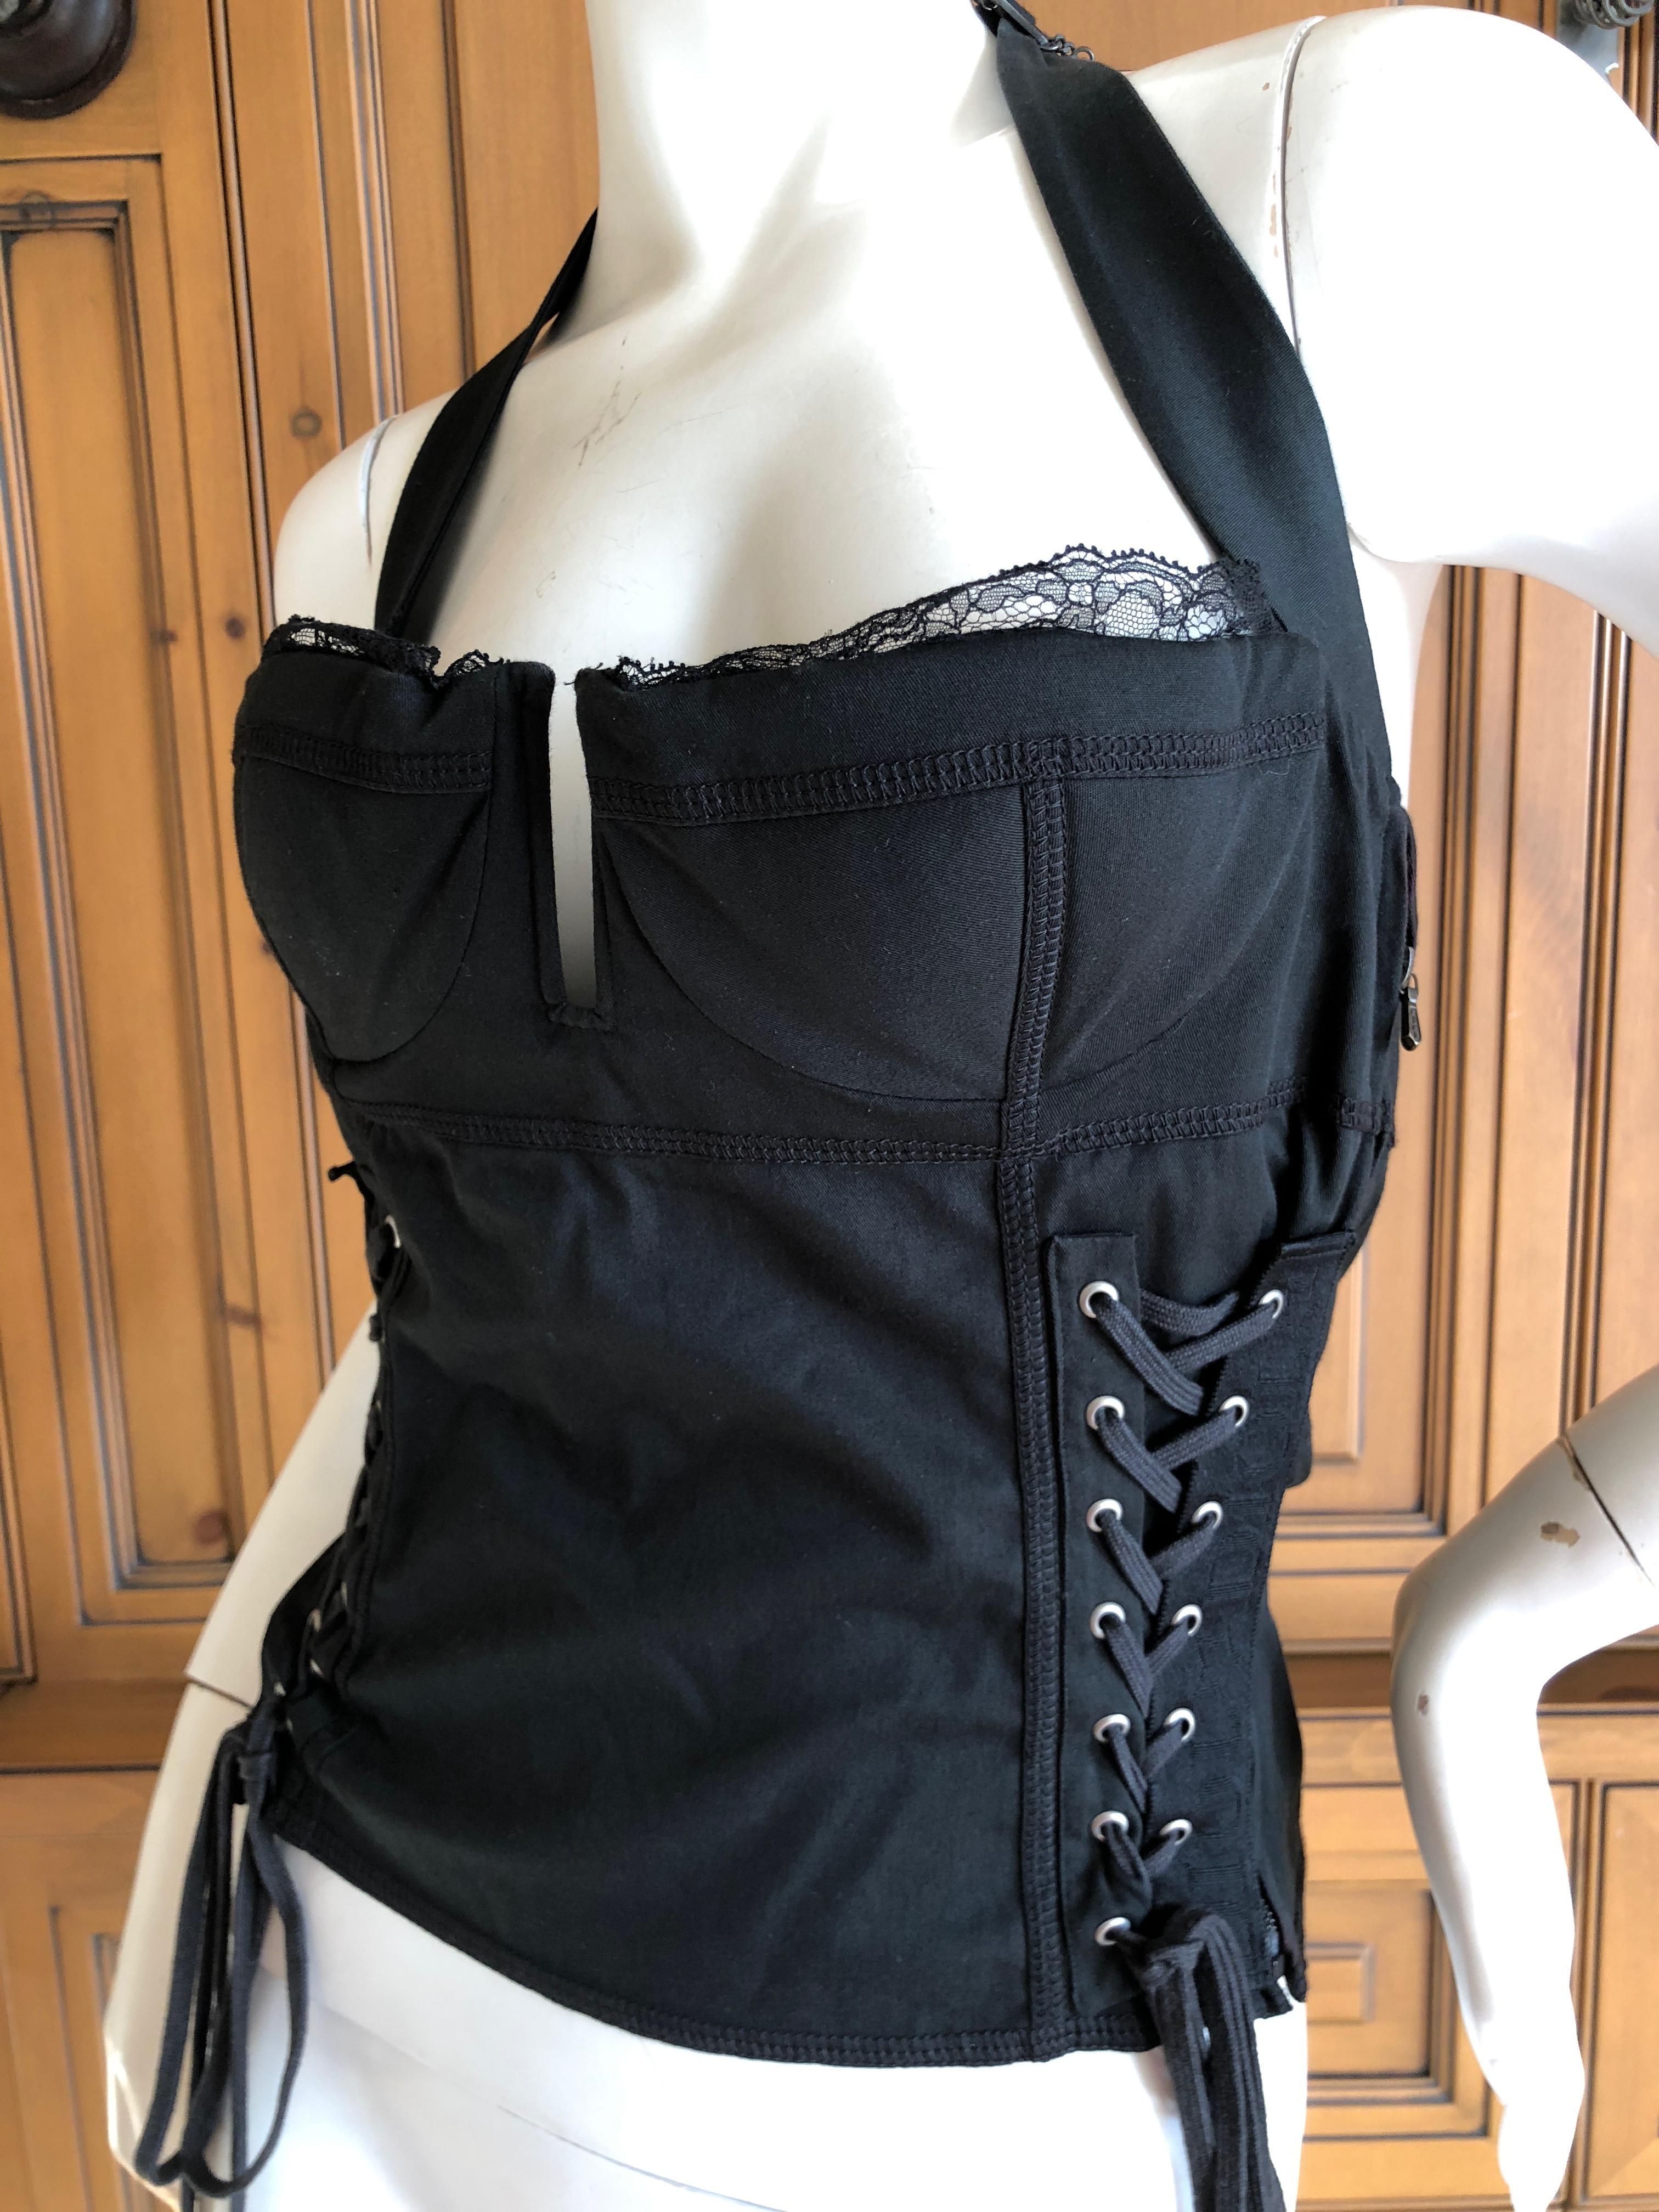 Christian Dior by John Galliano Vintage Black Lace Trimmed Corset For Sale 5